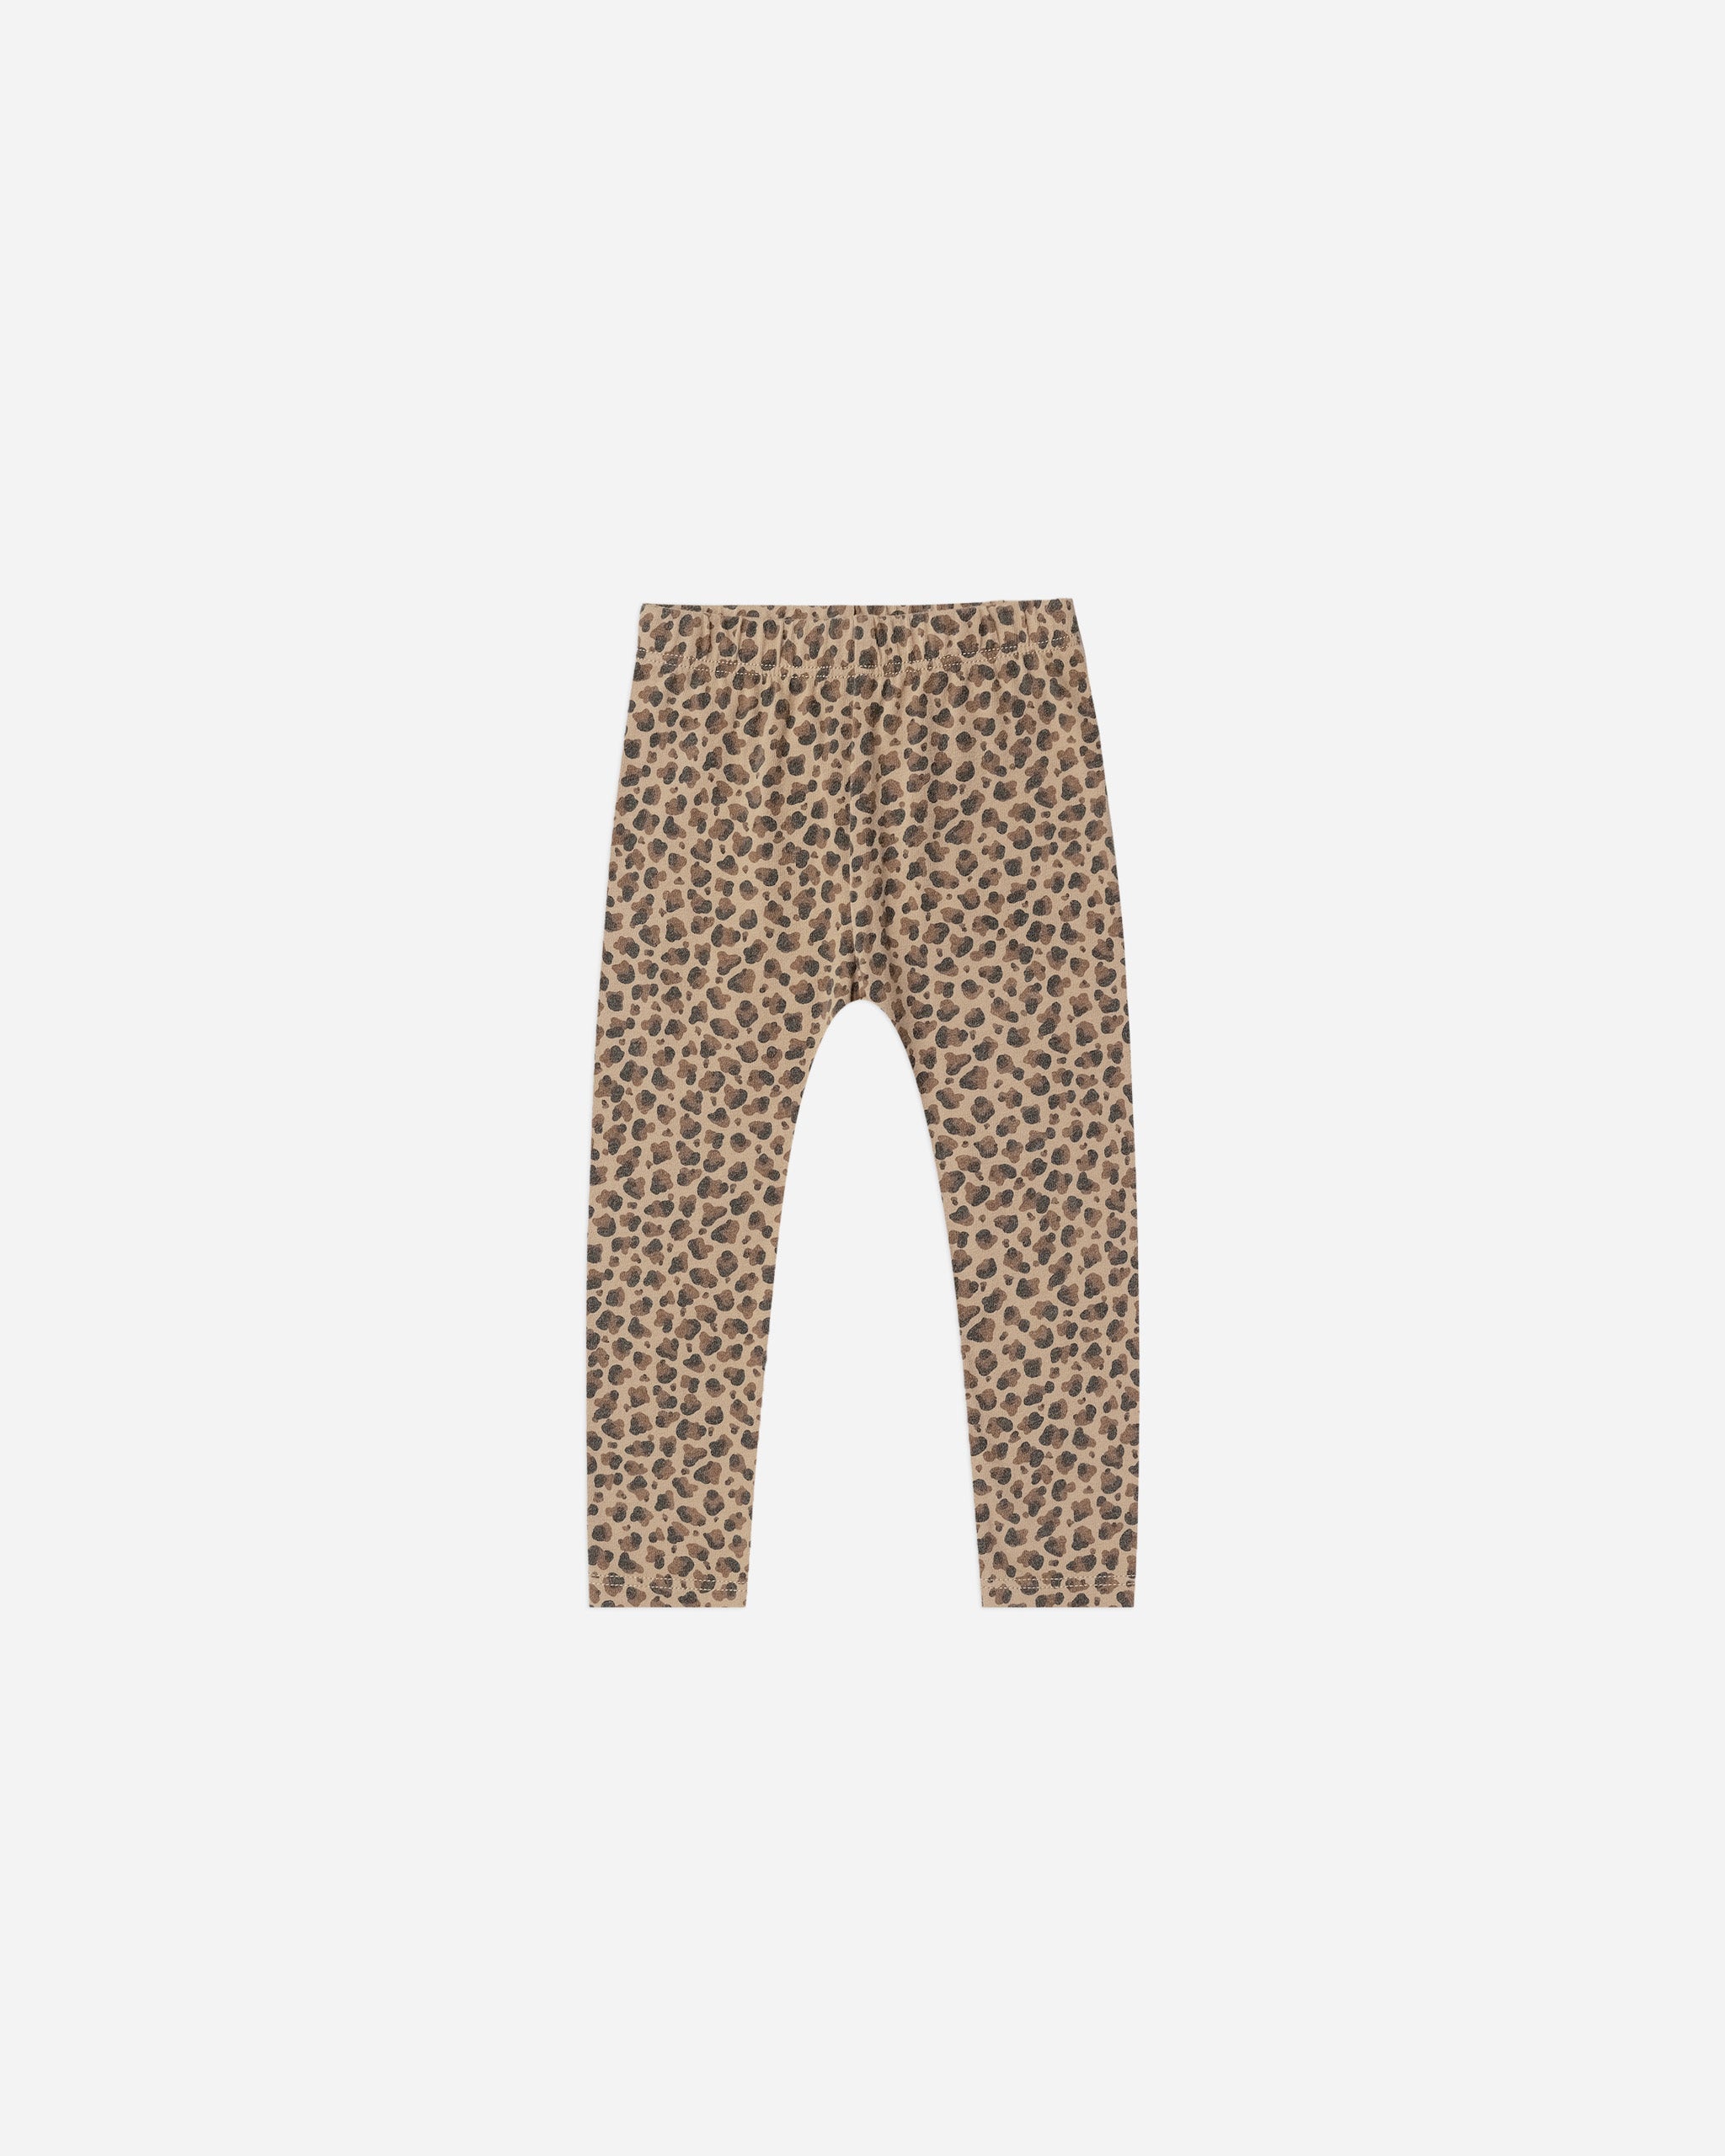 legging || cheetah print - Rylee + Cru | Kids Clothes | Trendy Baby Clothes | Modern Infant Outfits |